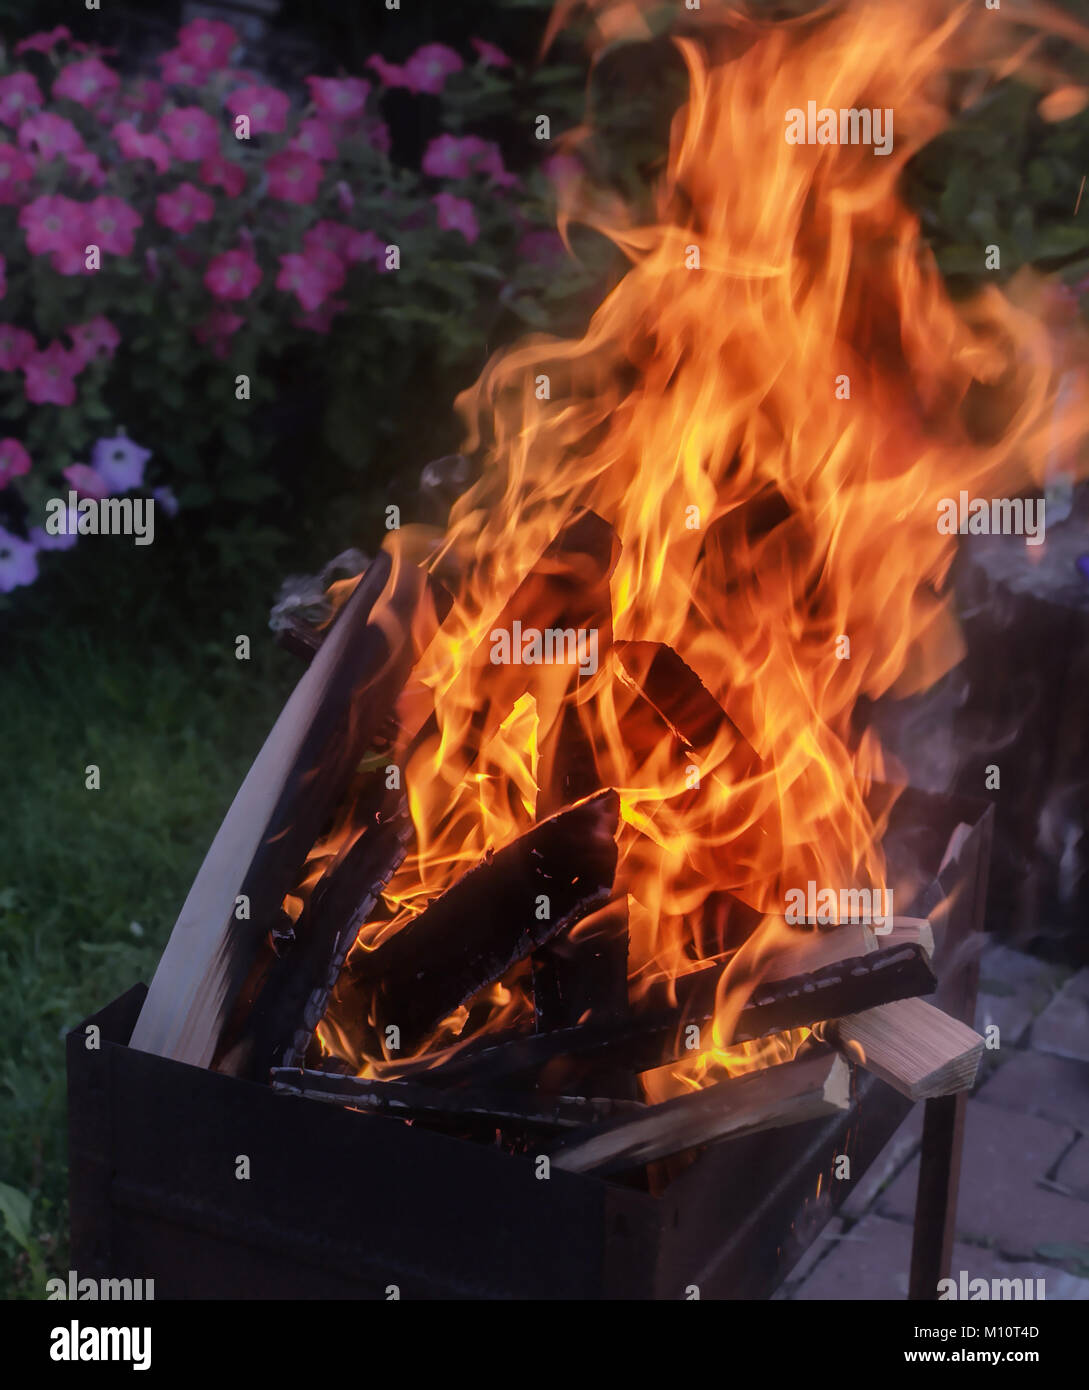 Bright fire in grill at evening summer garden Stock Photo